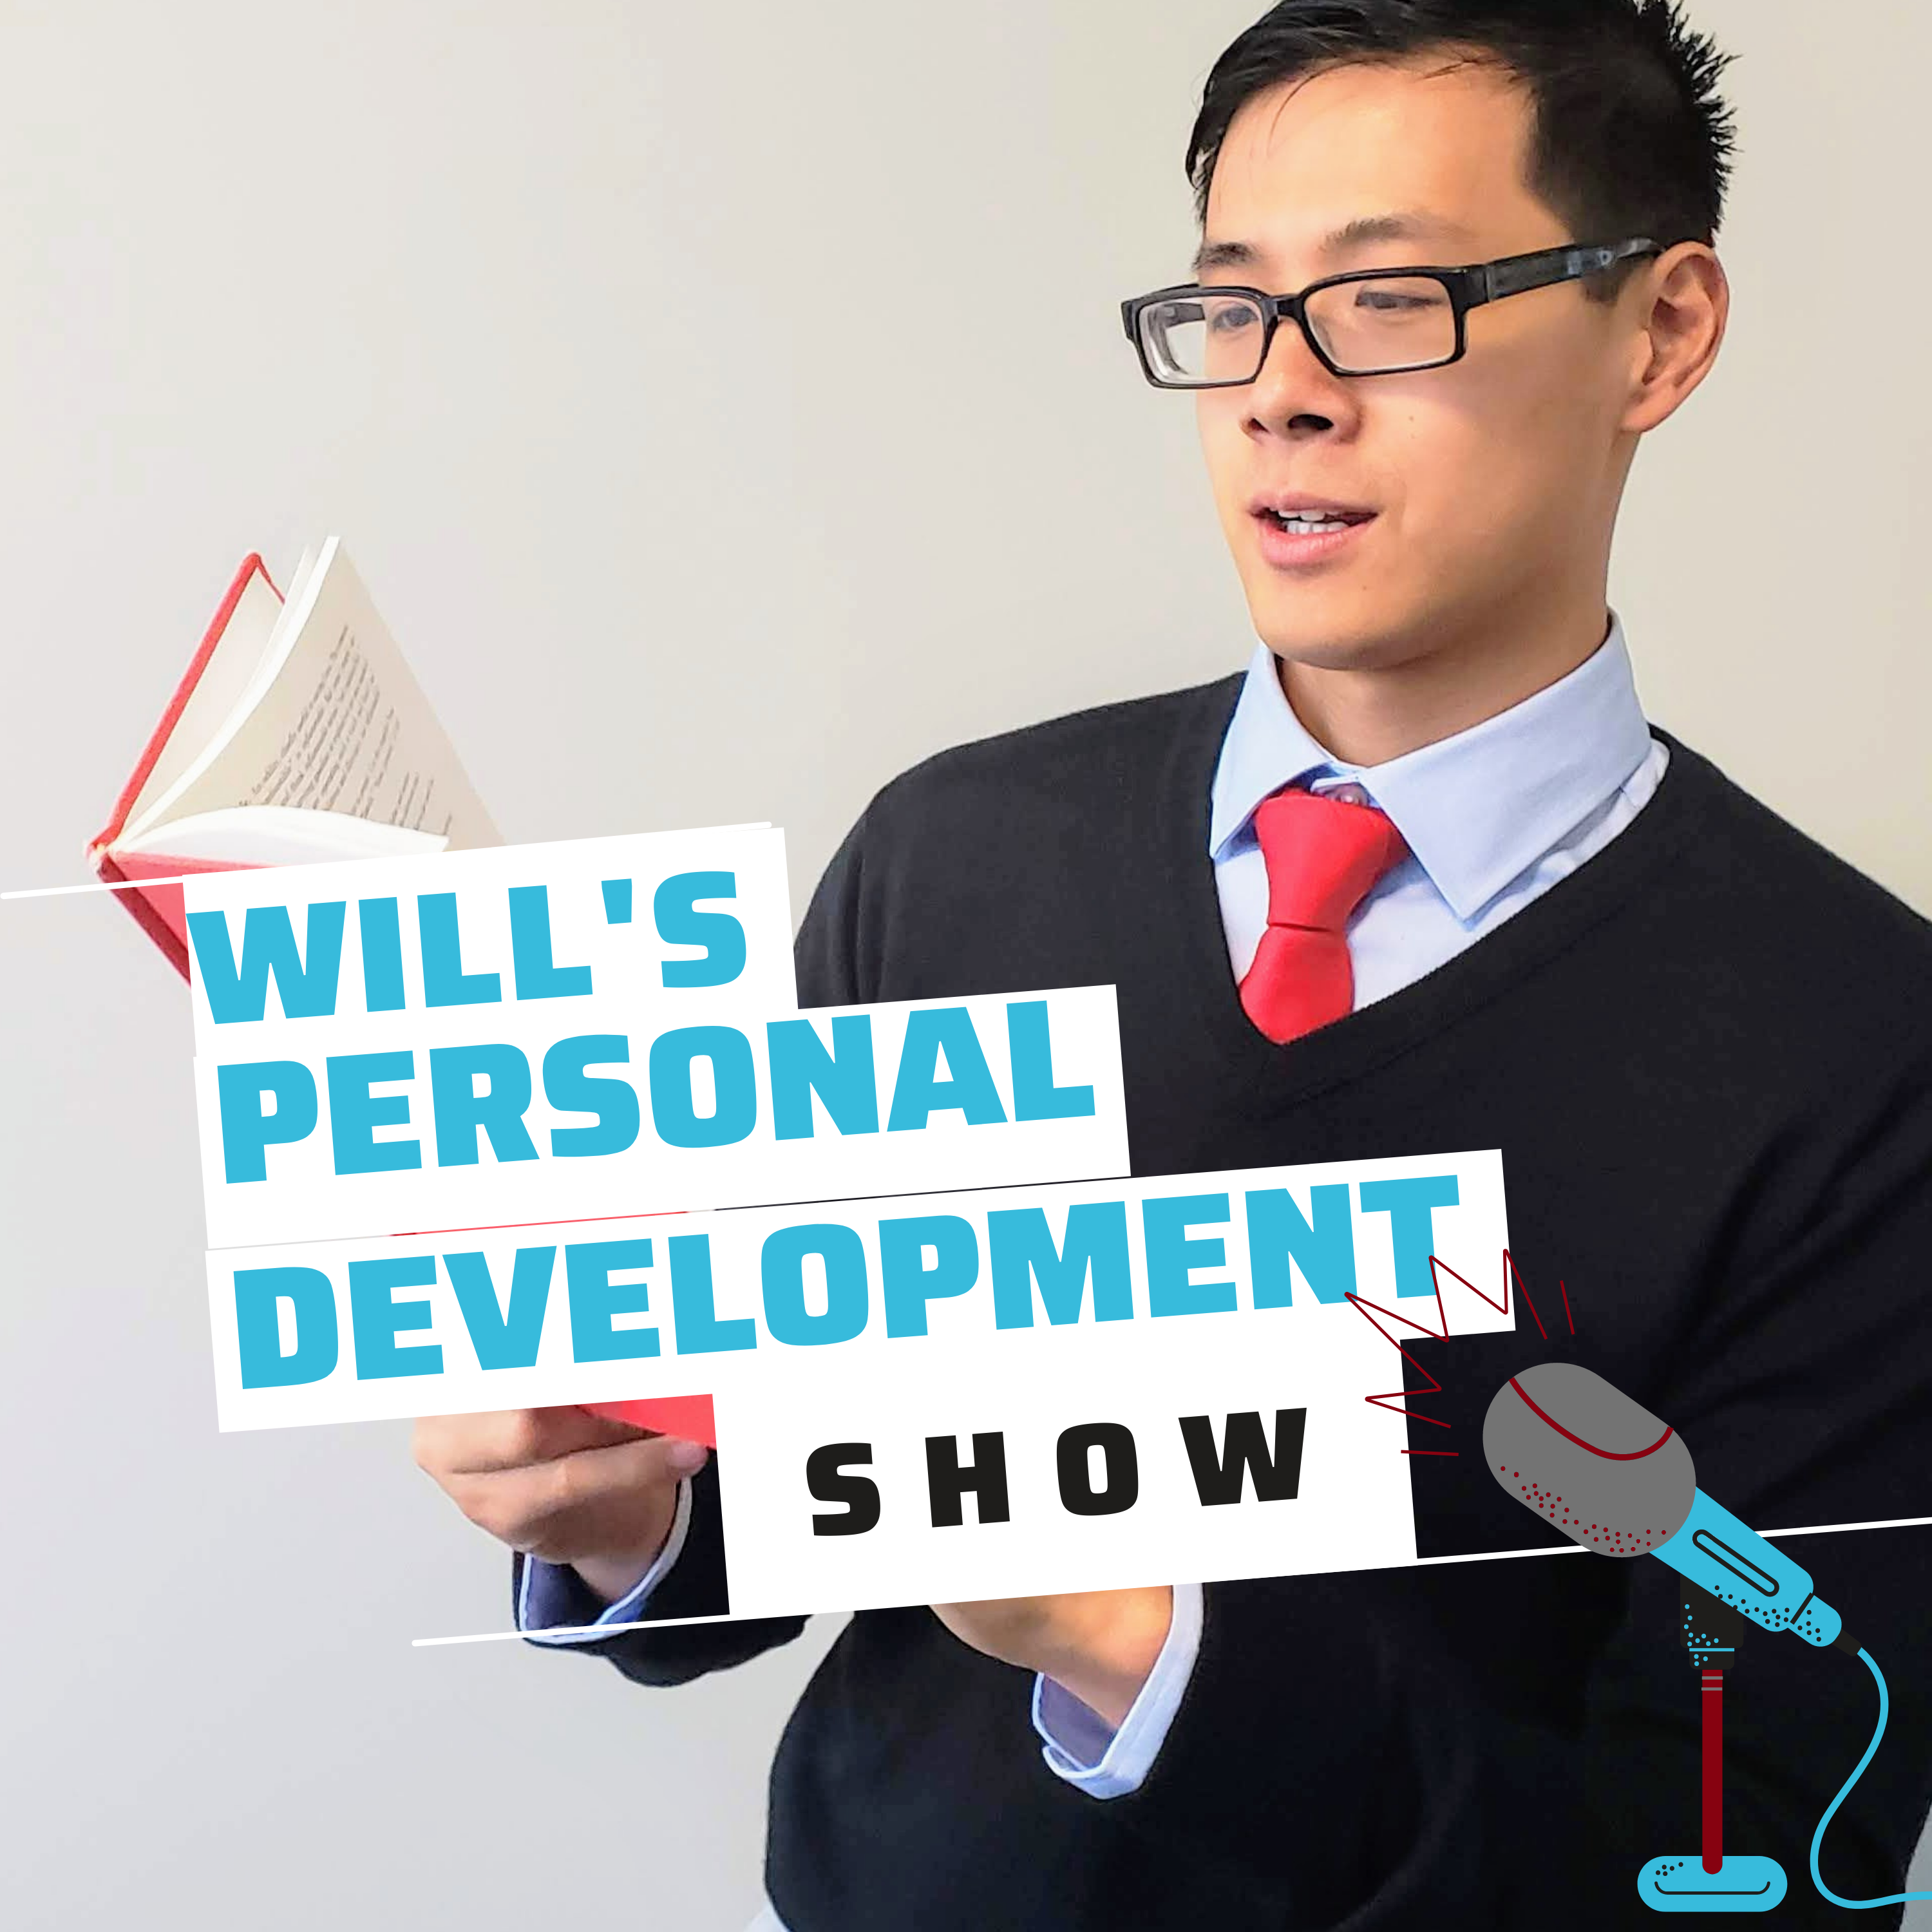 Will's Personal Development Show for Asian American Men: Success Advice